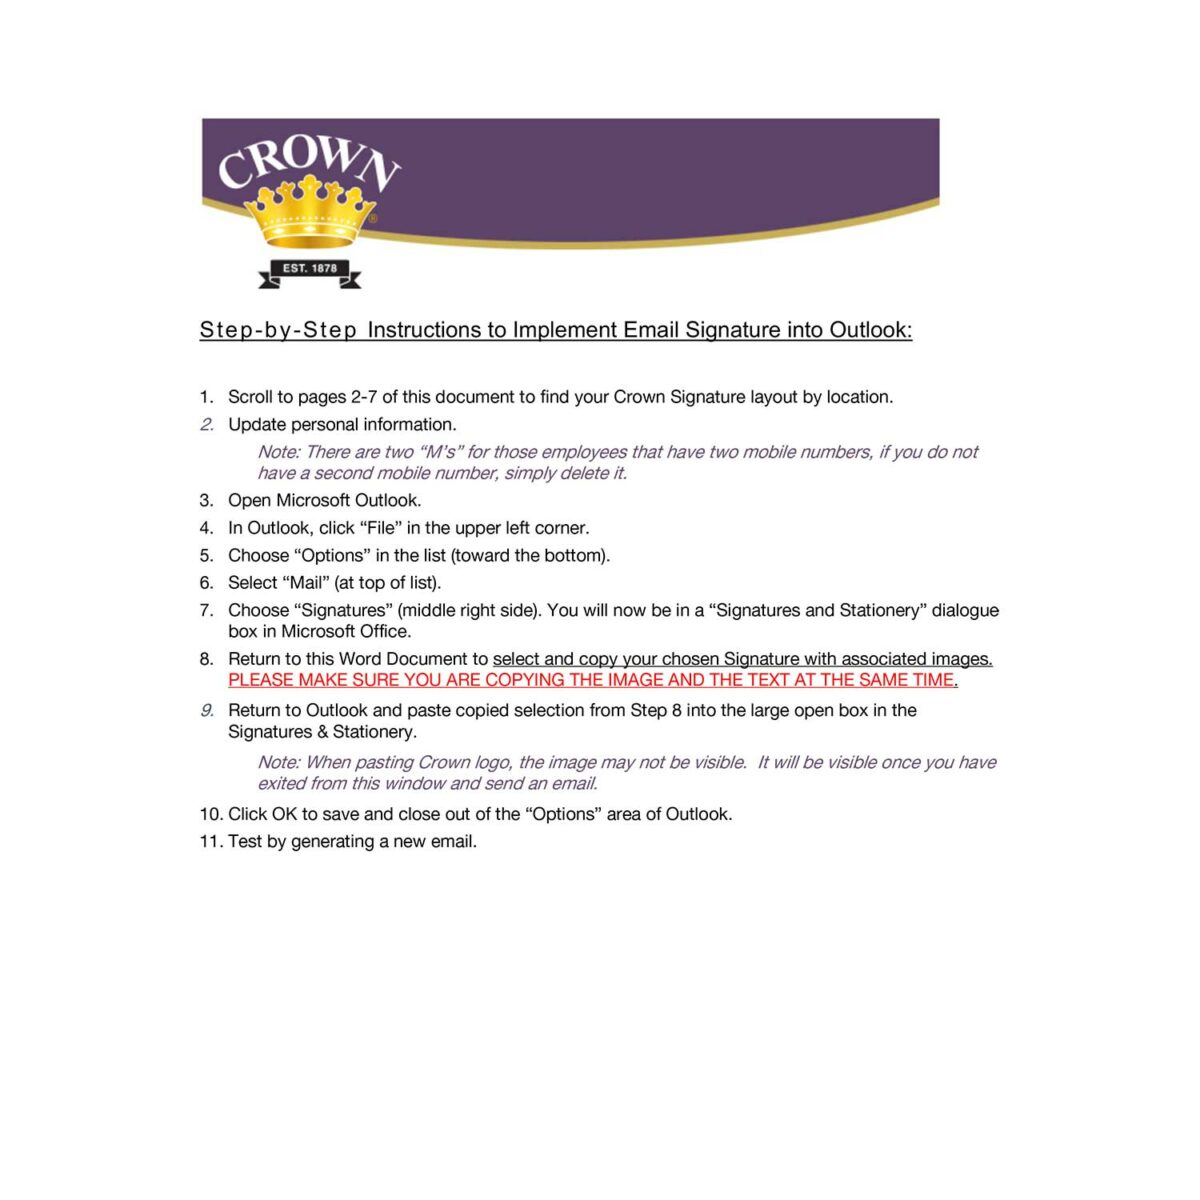 Crown Outlook Email Signature Instructions International